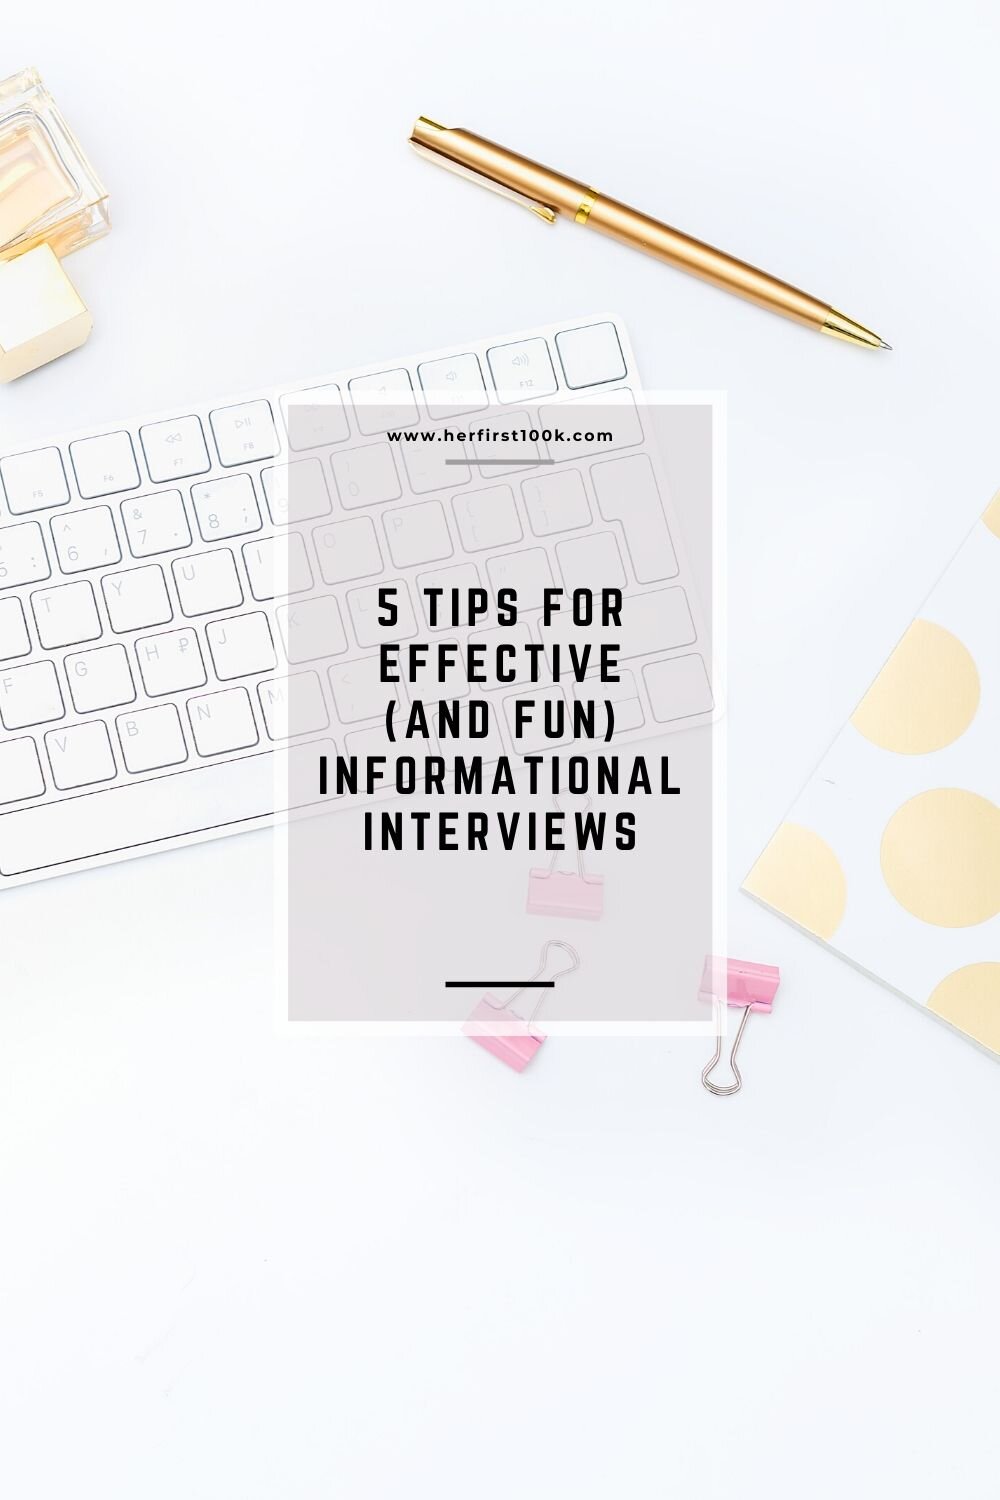 Copy of 5 Tips for Effective and Fun Informational Interviews.jpg